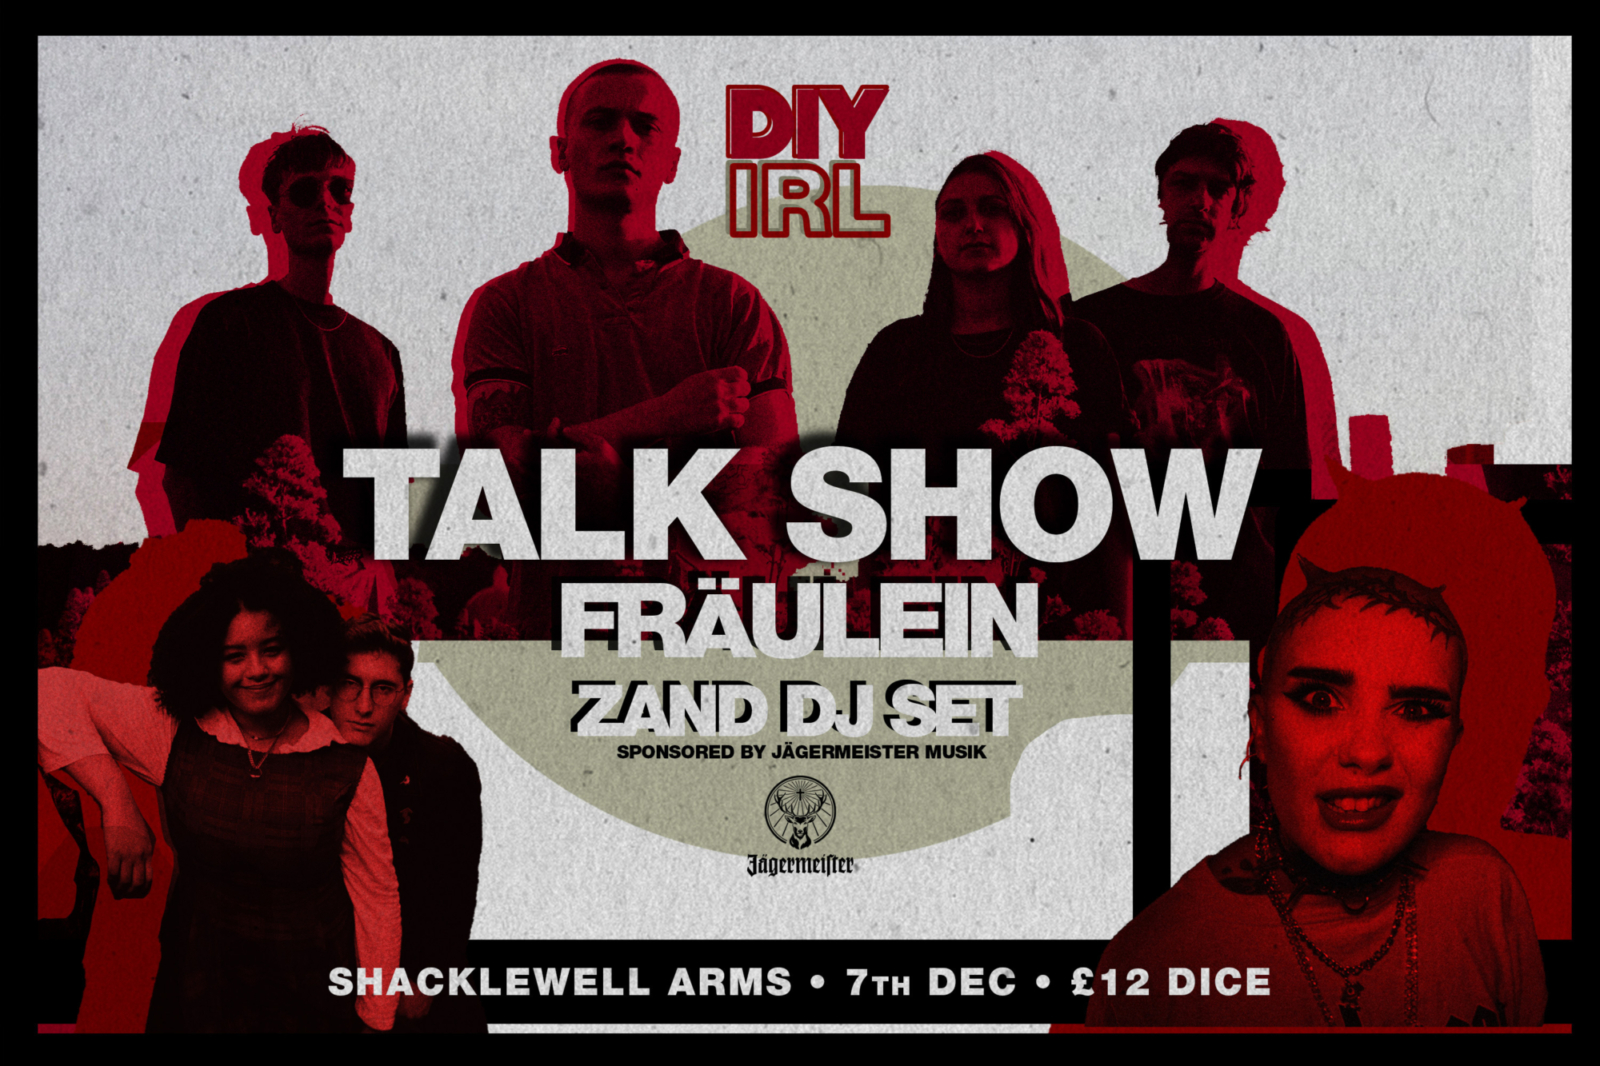 Talk Show, Fräulein and ZAND to play December's DIY IRL show